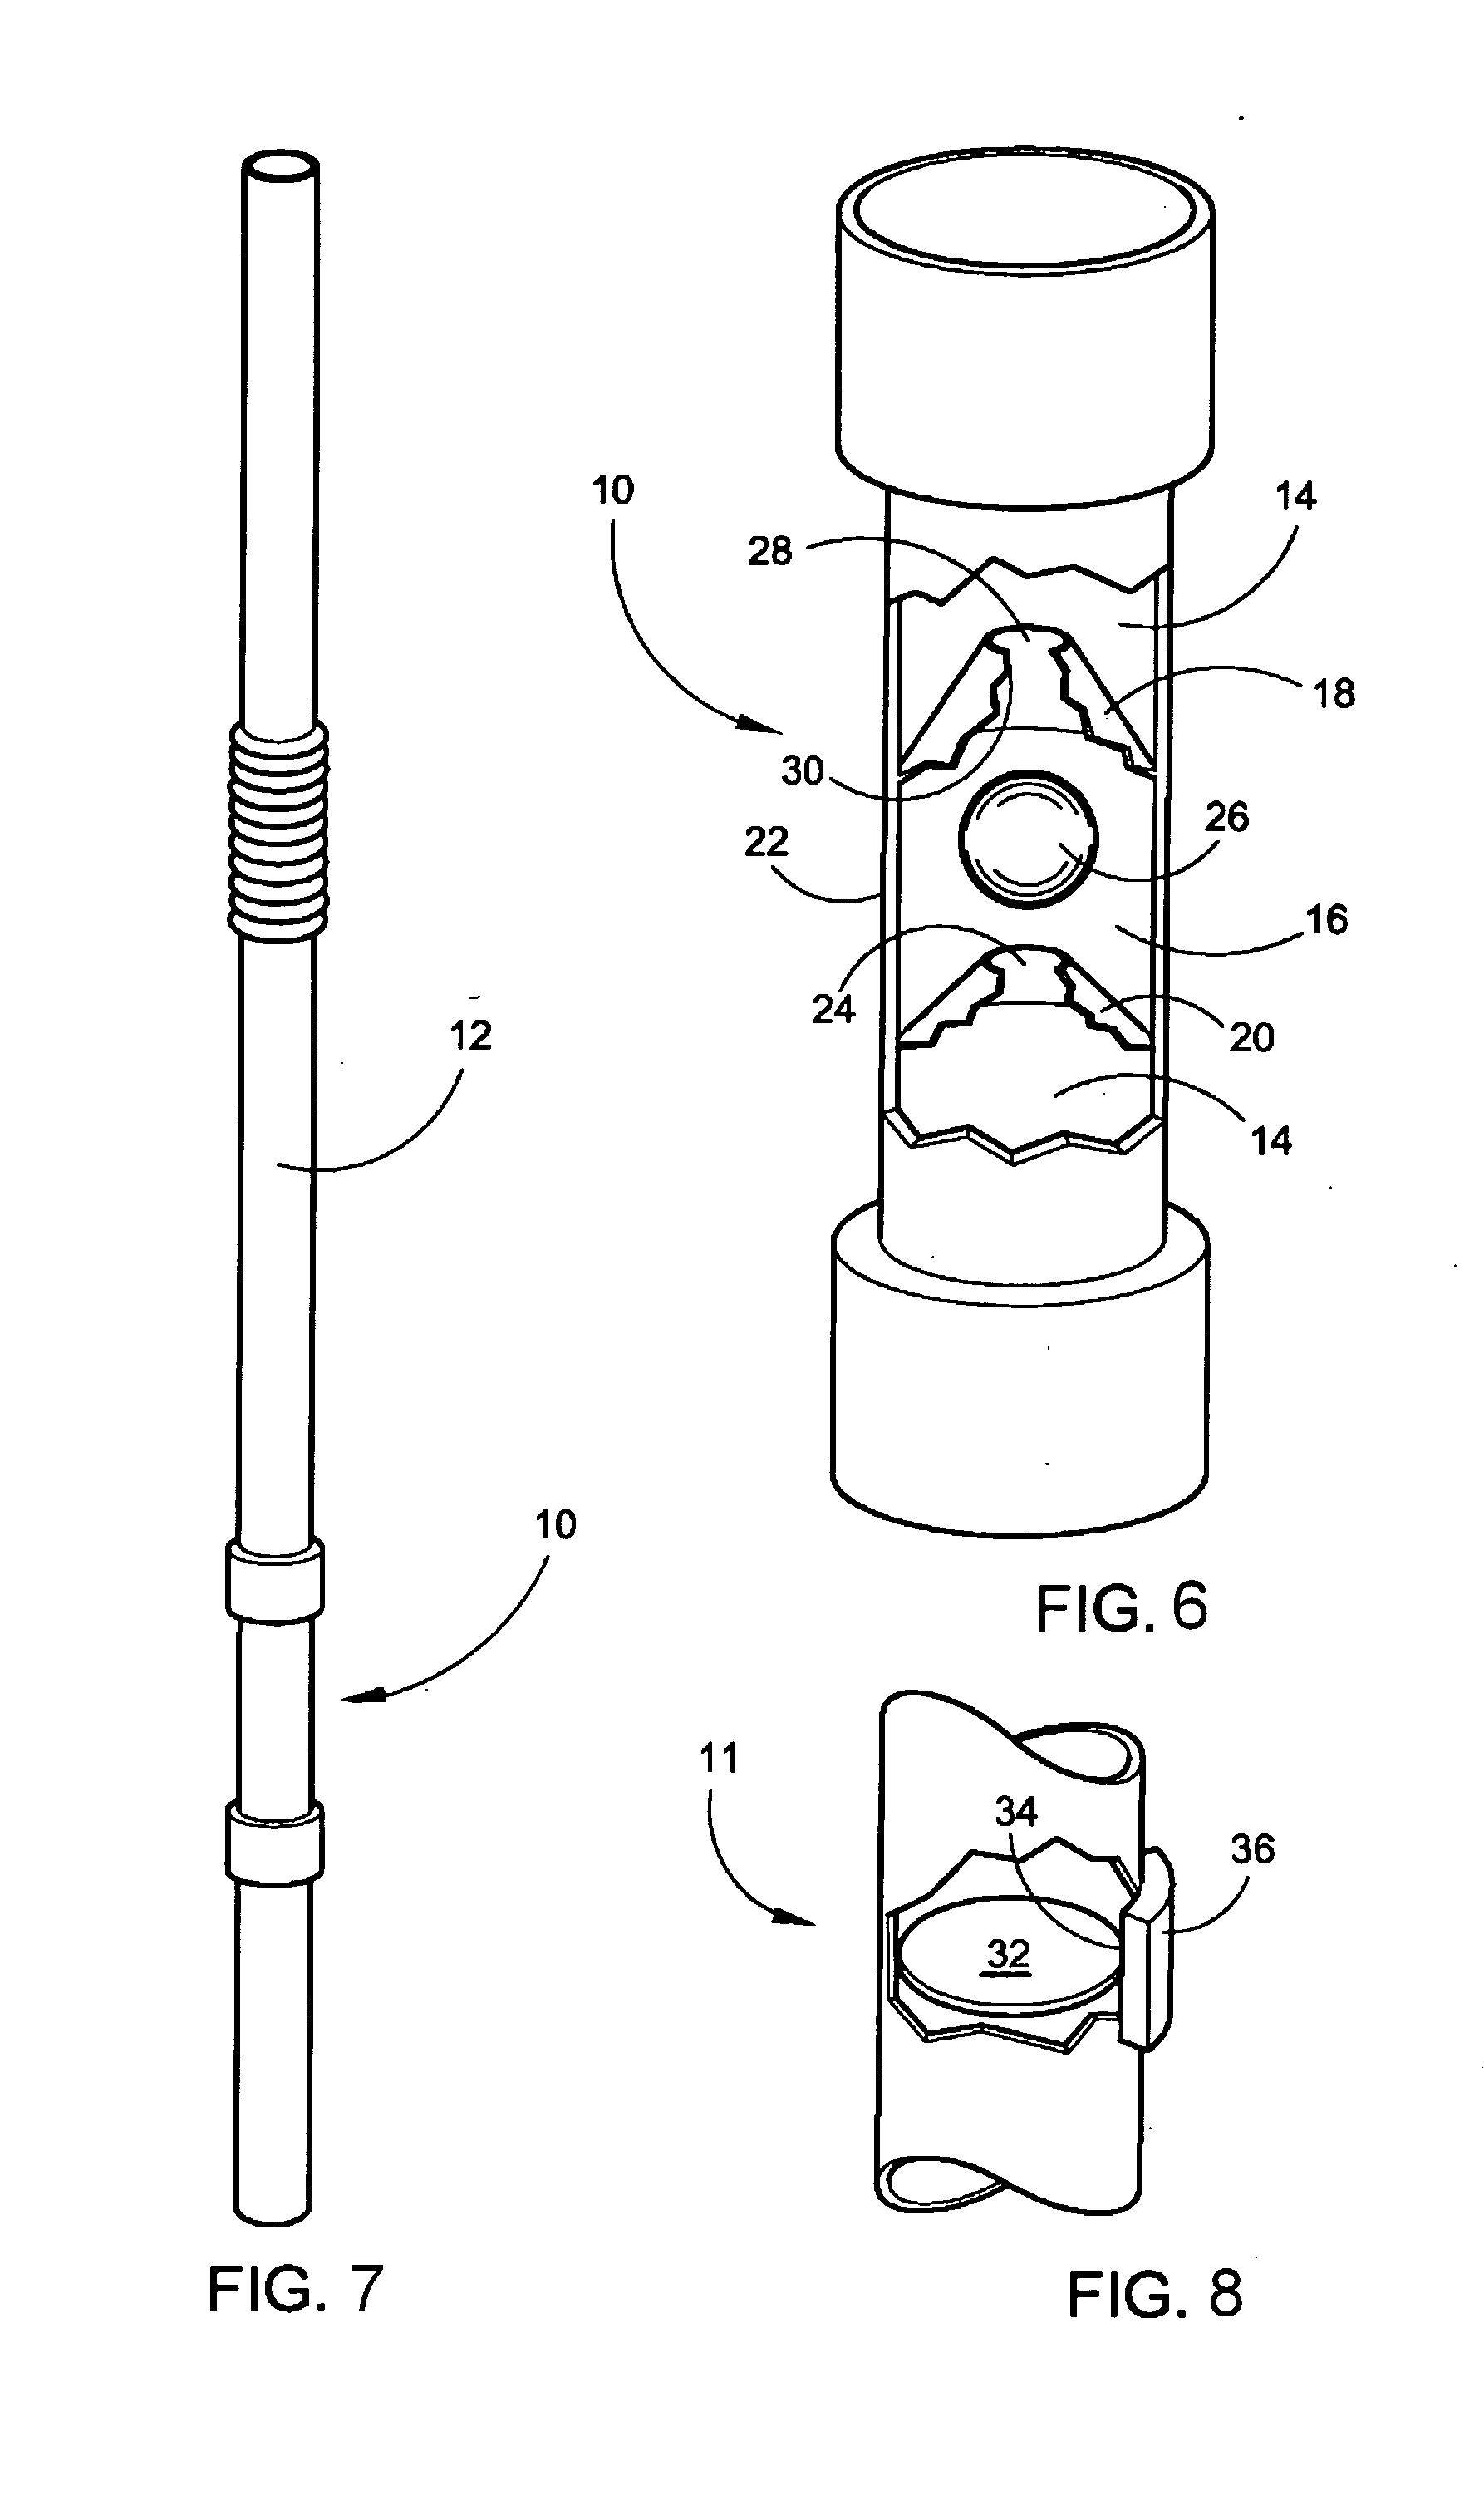 Apparatus and method for regulation of fluid flow from a straw